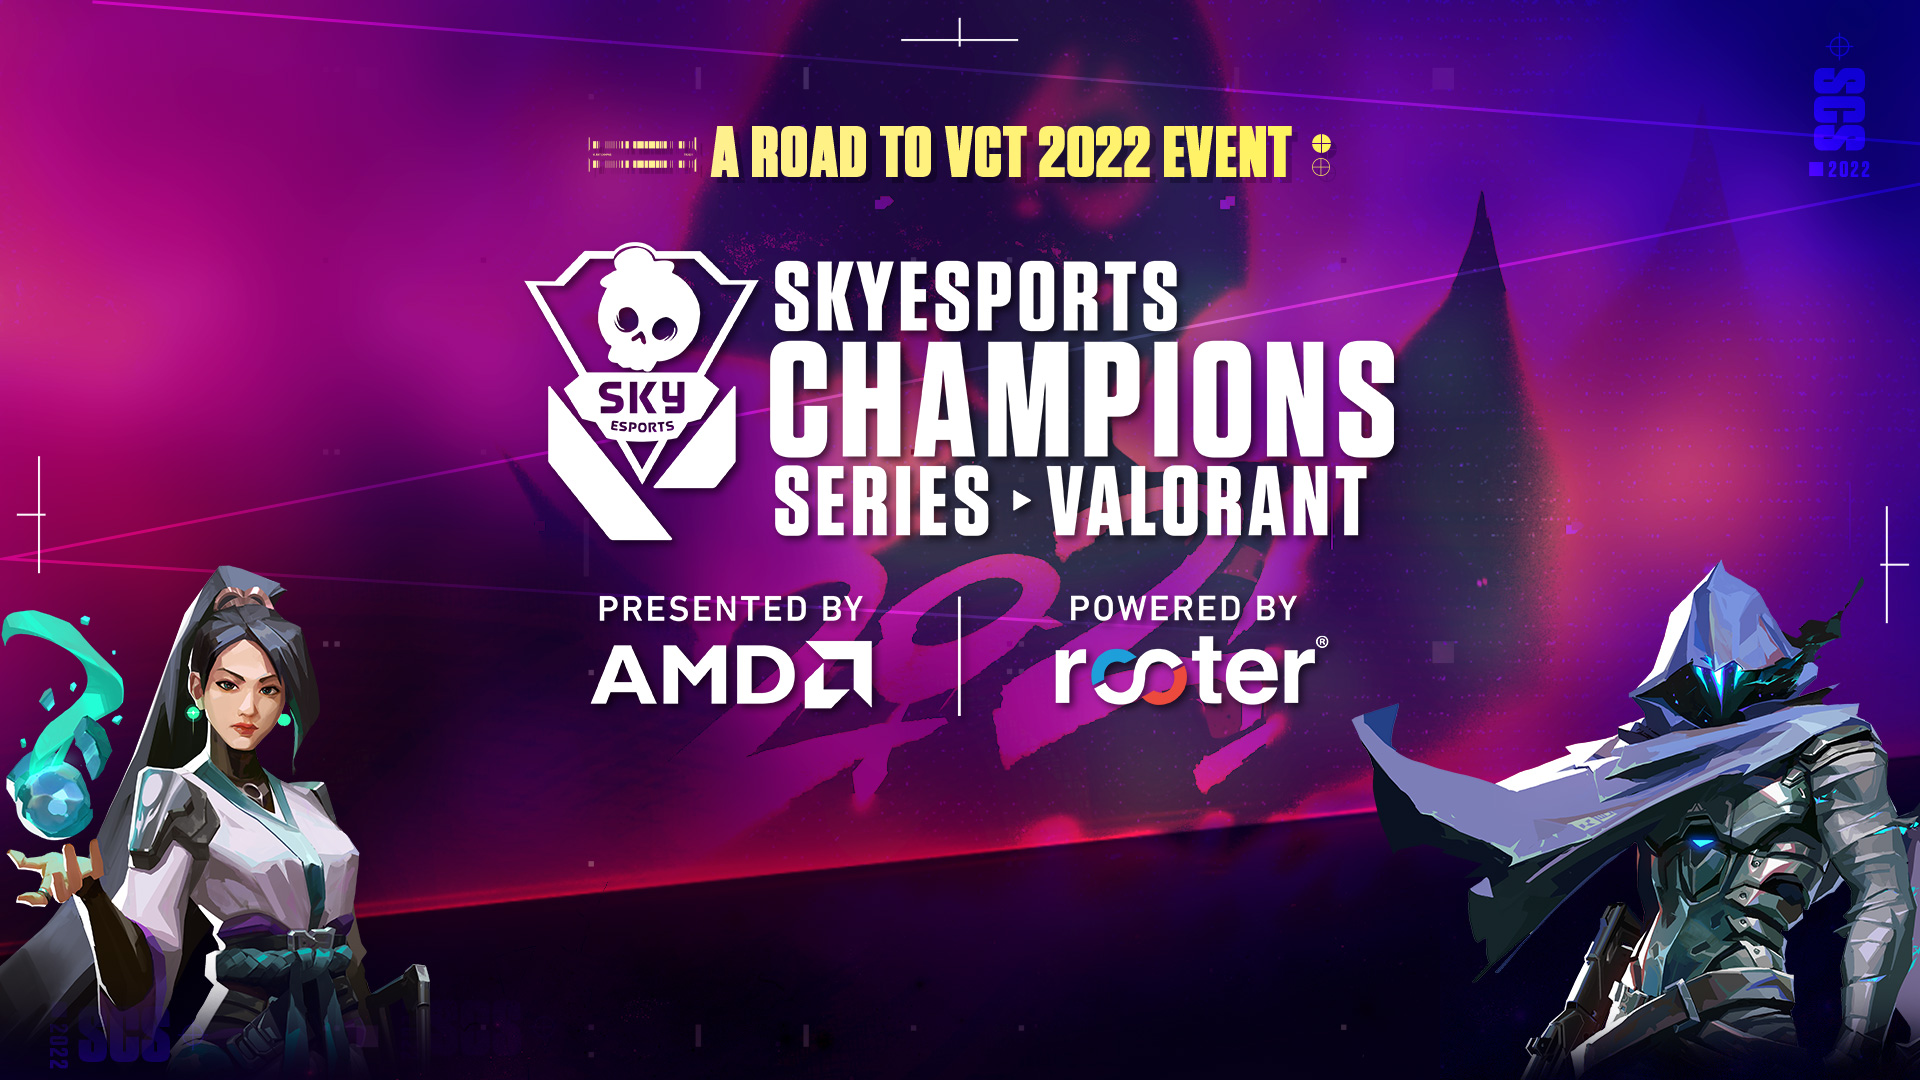 Skyesports partners with AMD and Rooter for Skyesports Champions Series, Nexus Gaming LLC